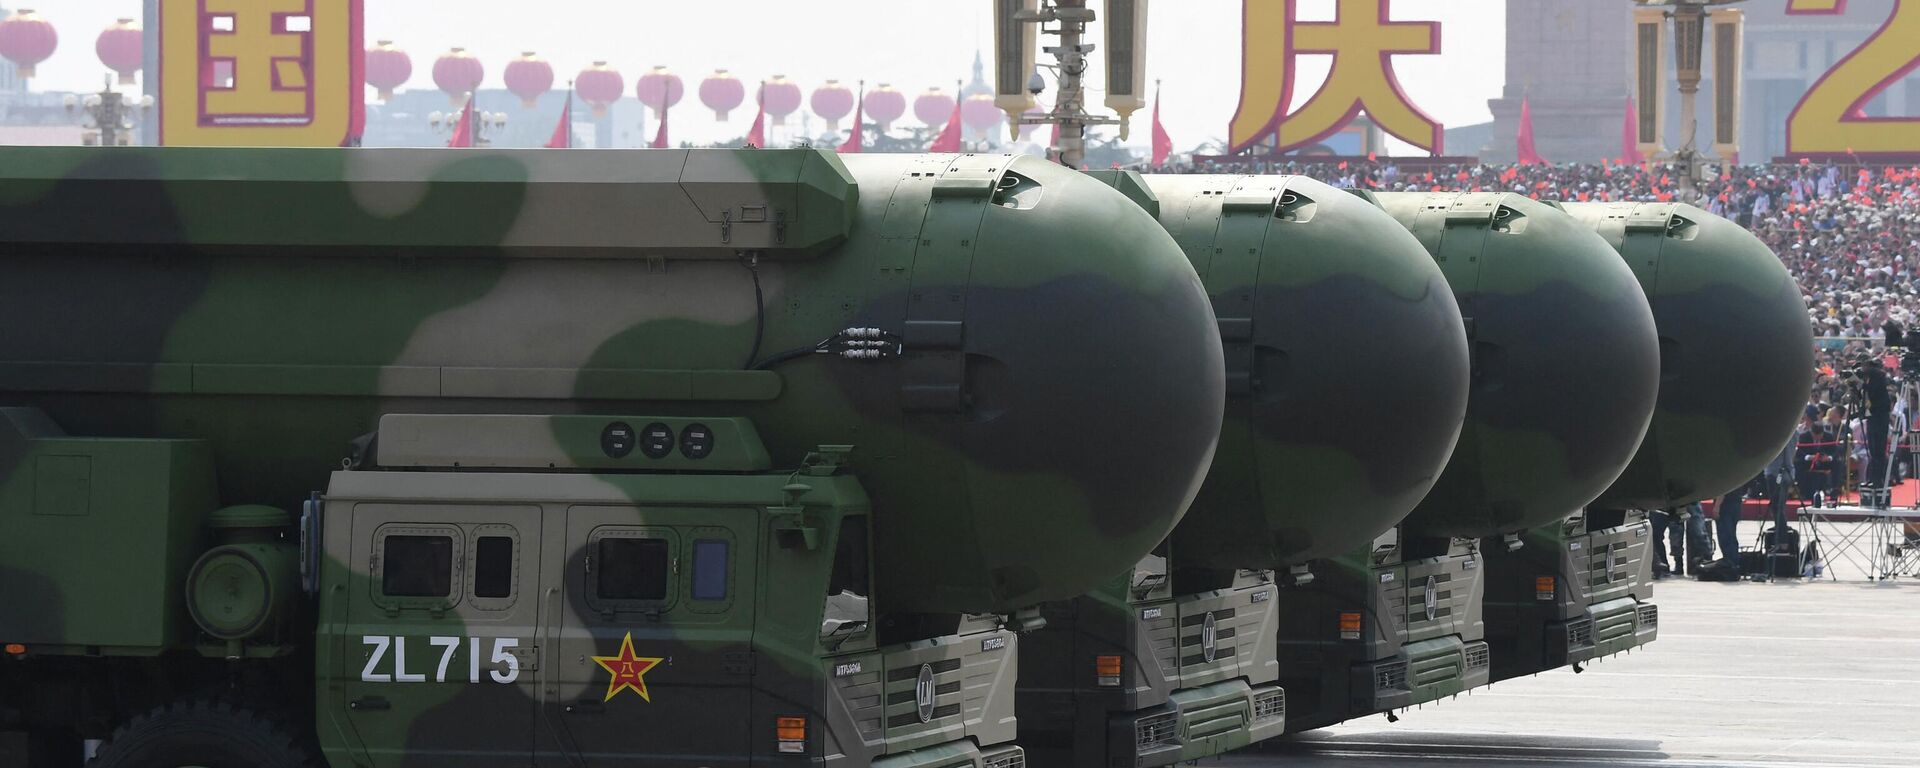 China's DF-41 nuclear-capable intercontinental ballistic missiles are seen during a military parade at Tiananmen Square in Beijing on October 1, 2019, to mark the 70th anniversary of the founding of the People's Republic of China.  - Sputnik International, 1920, 10.04.2022